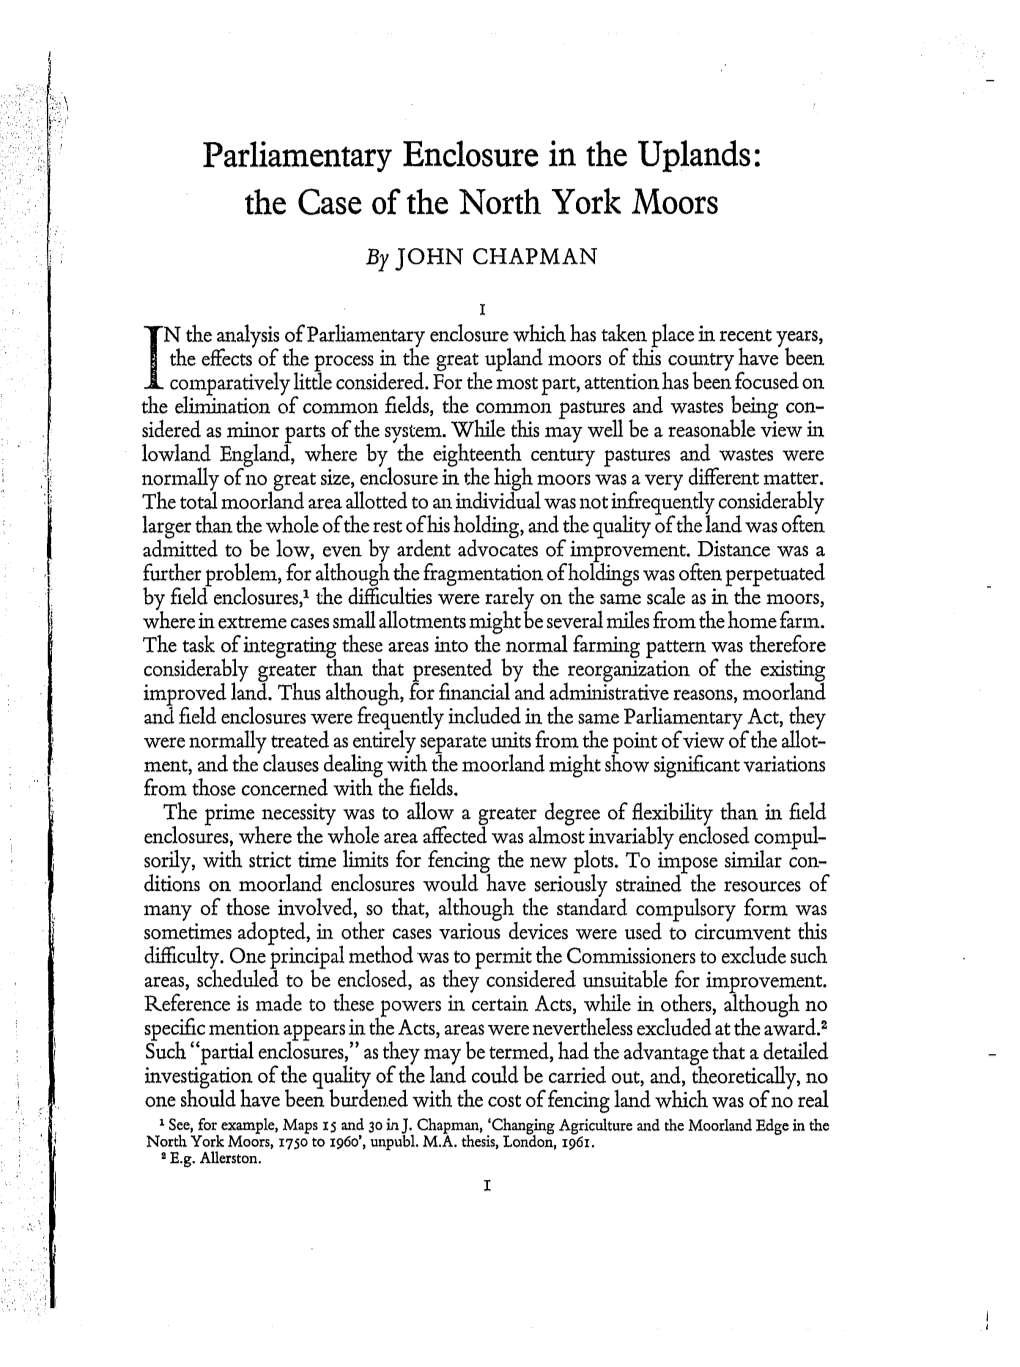 Parliamentary Enclosure in the Uplands: the Case of the North York Moors